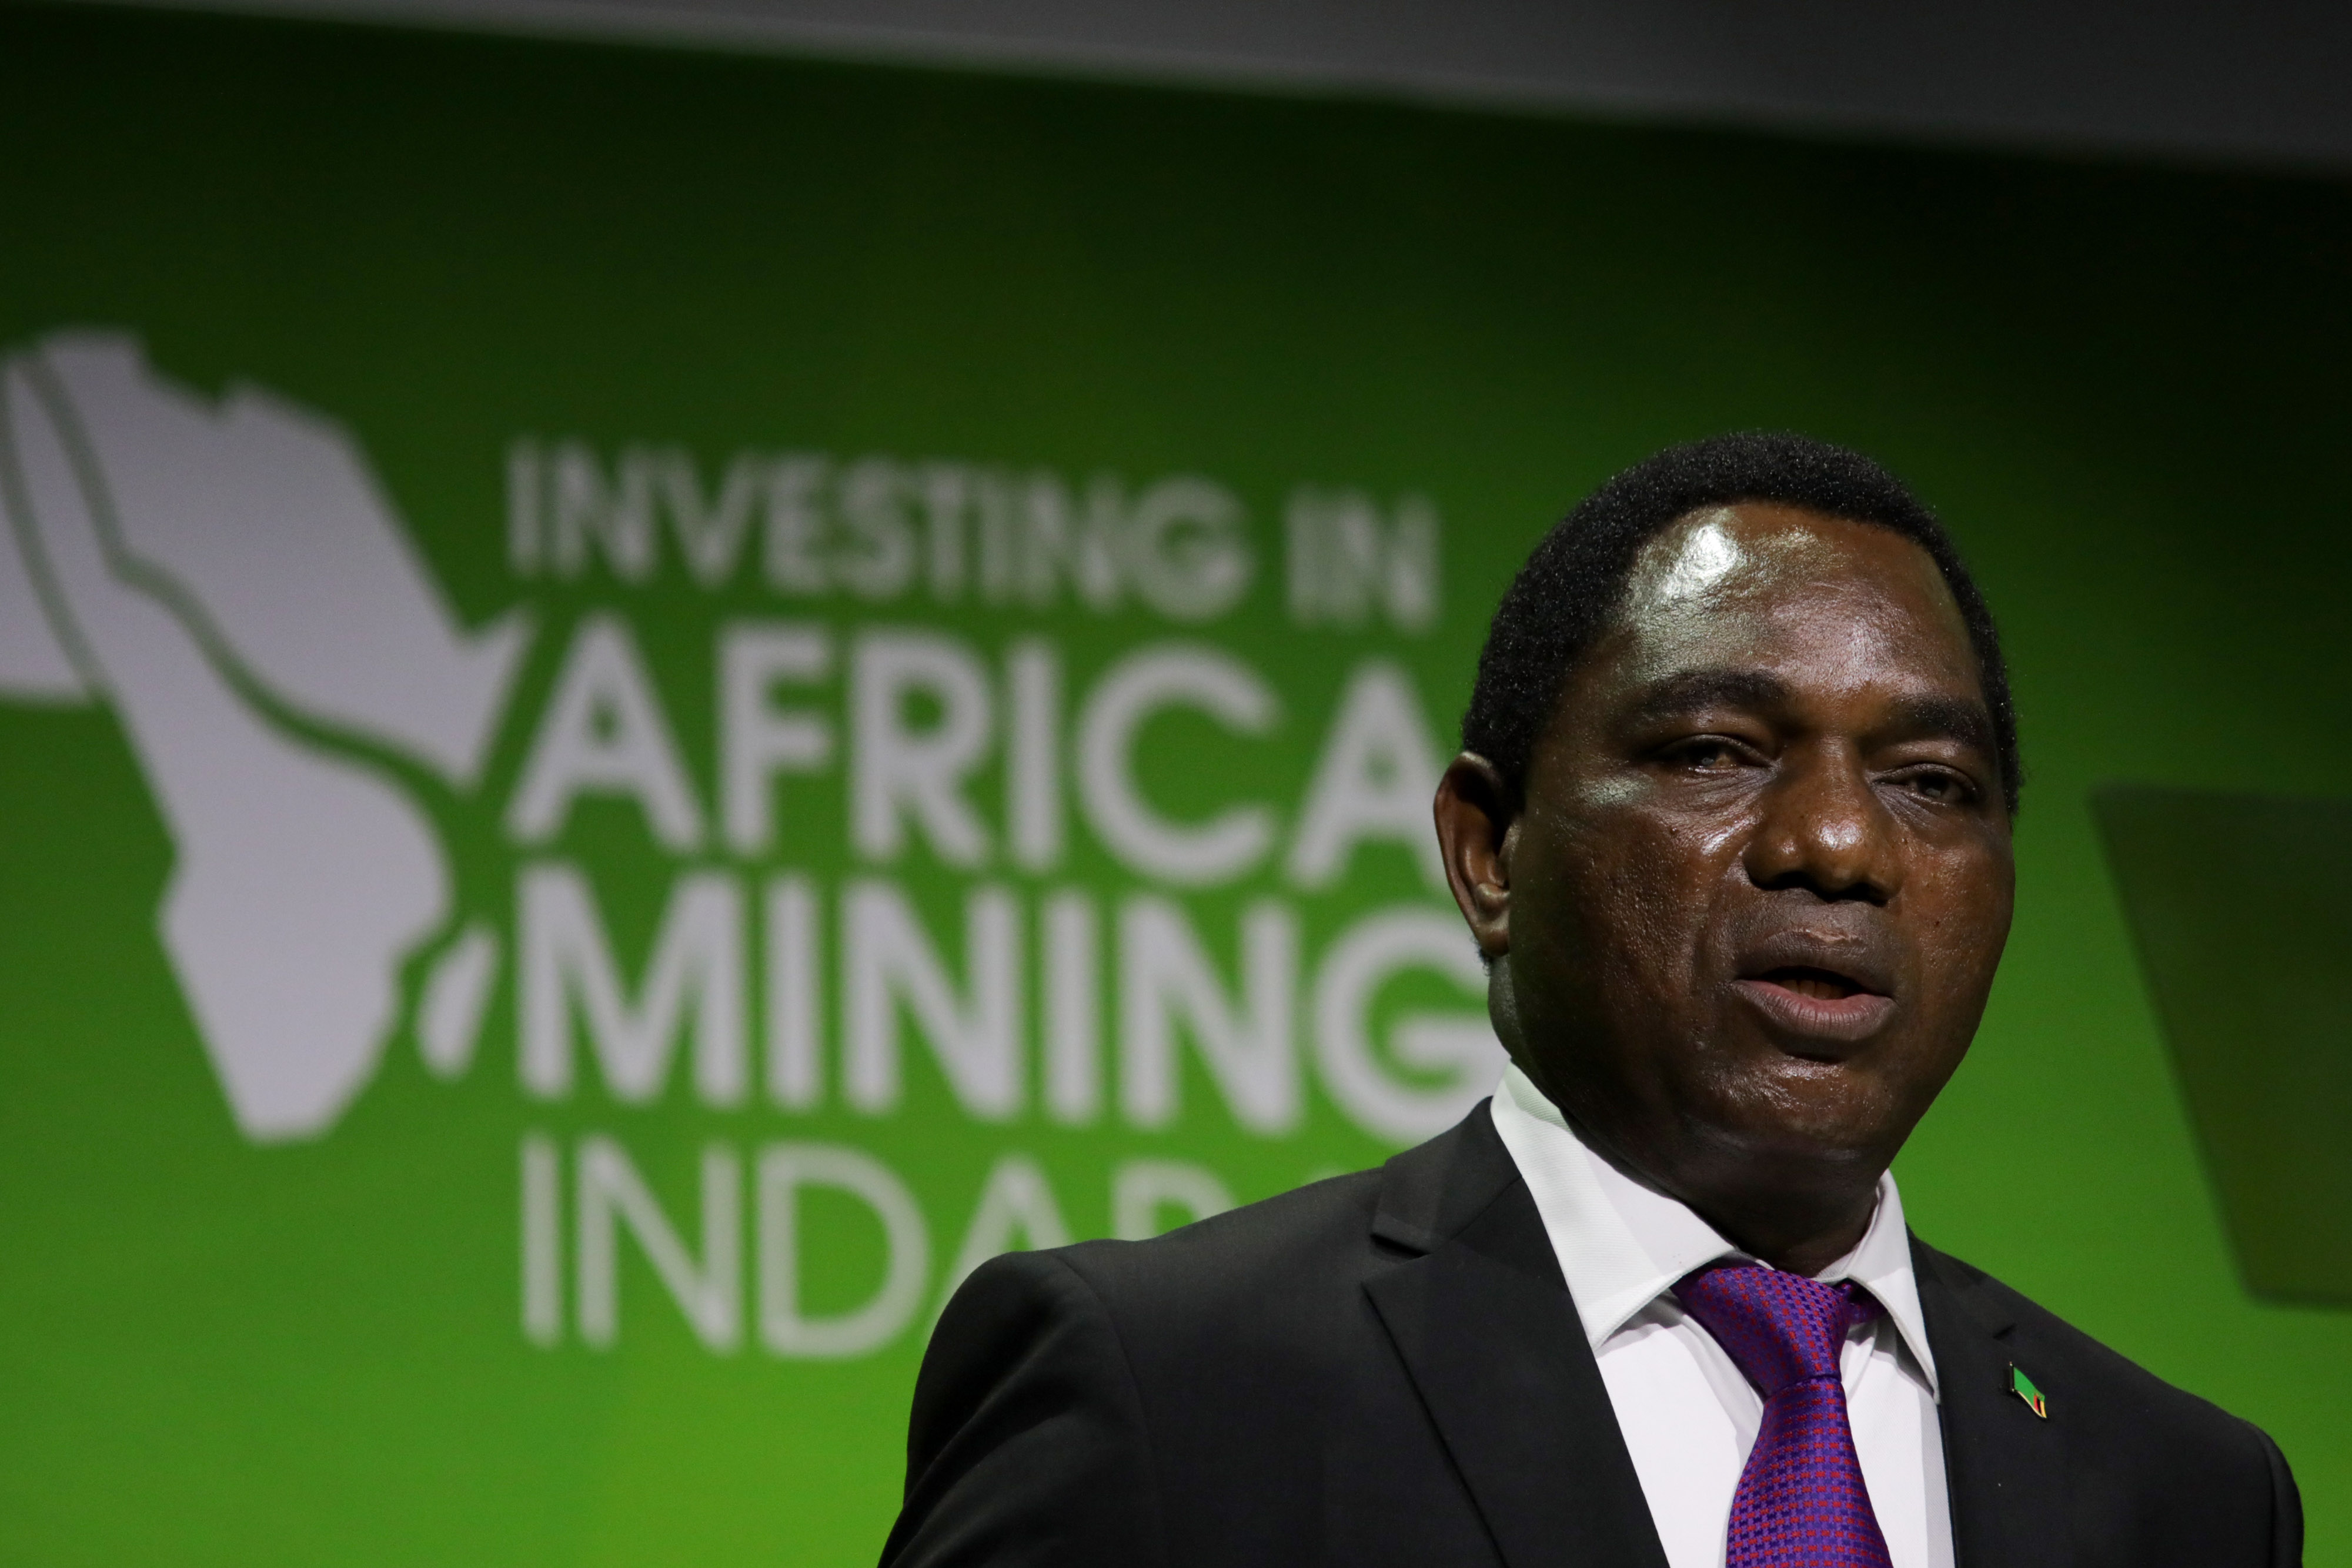 Zambian President Hakainde Hichilema speaks at the opening of the Investing in African Mining Indaba in Cape Town earlier this month.